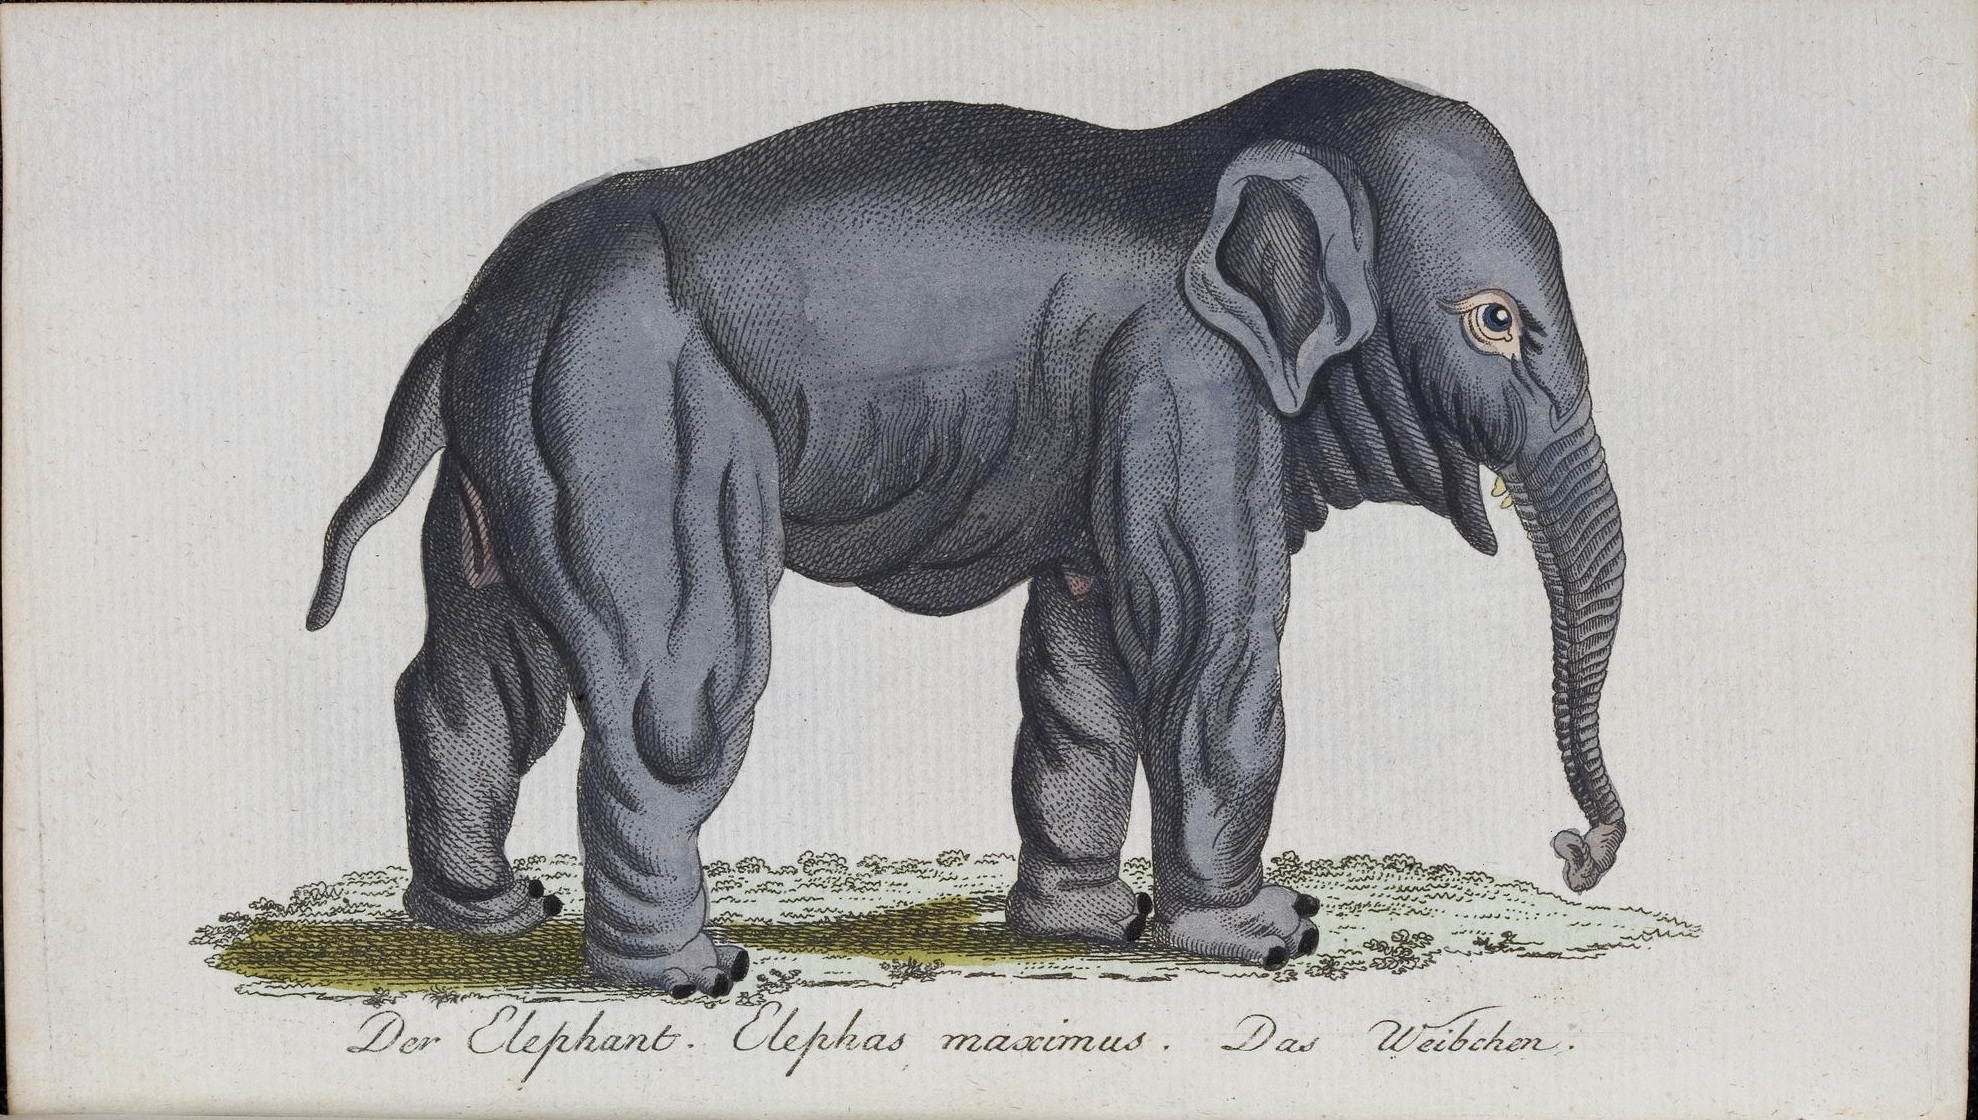 an elephant standing in grass, from a 19th century book